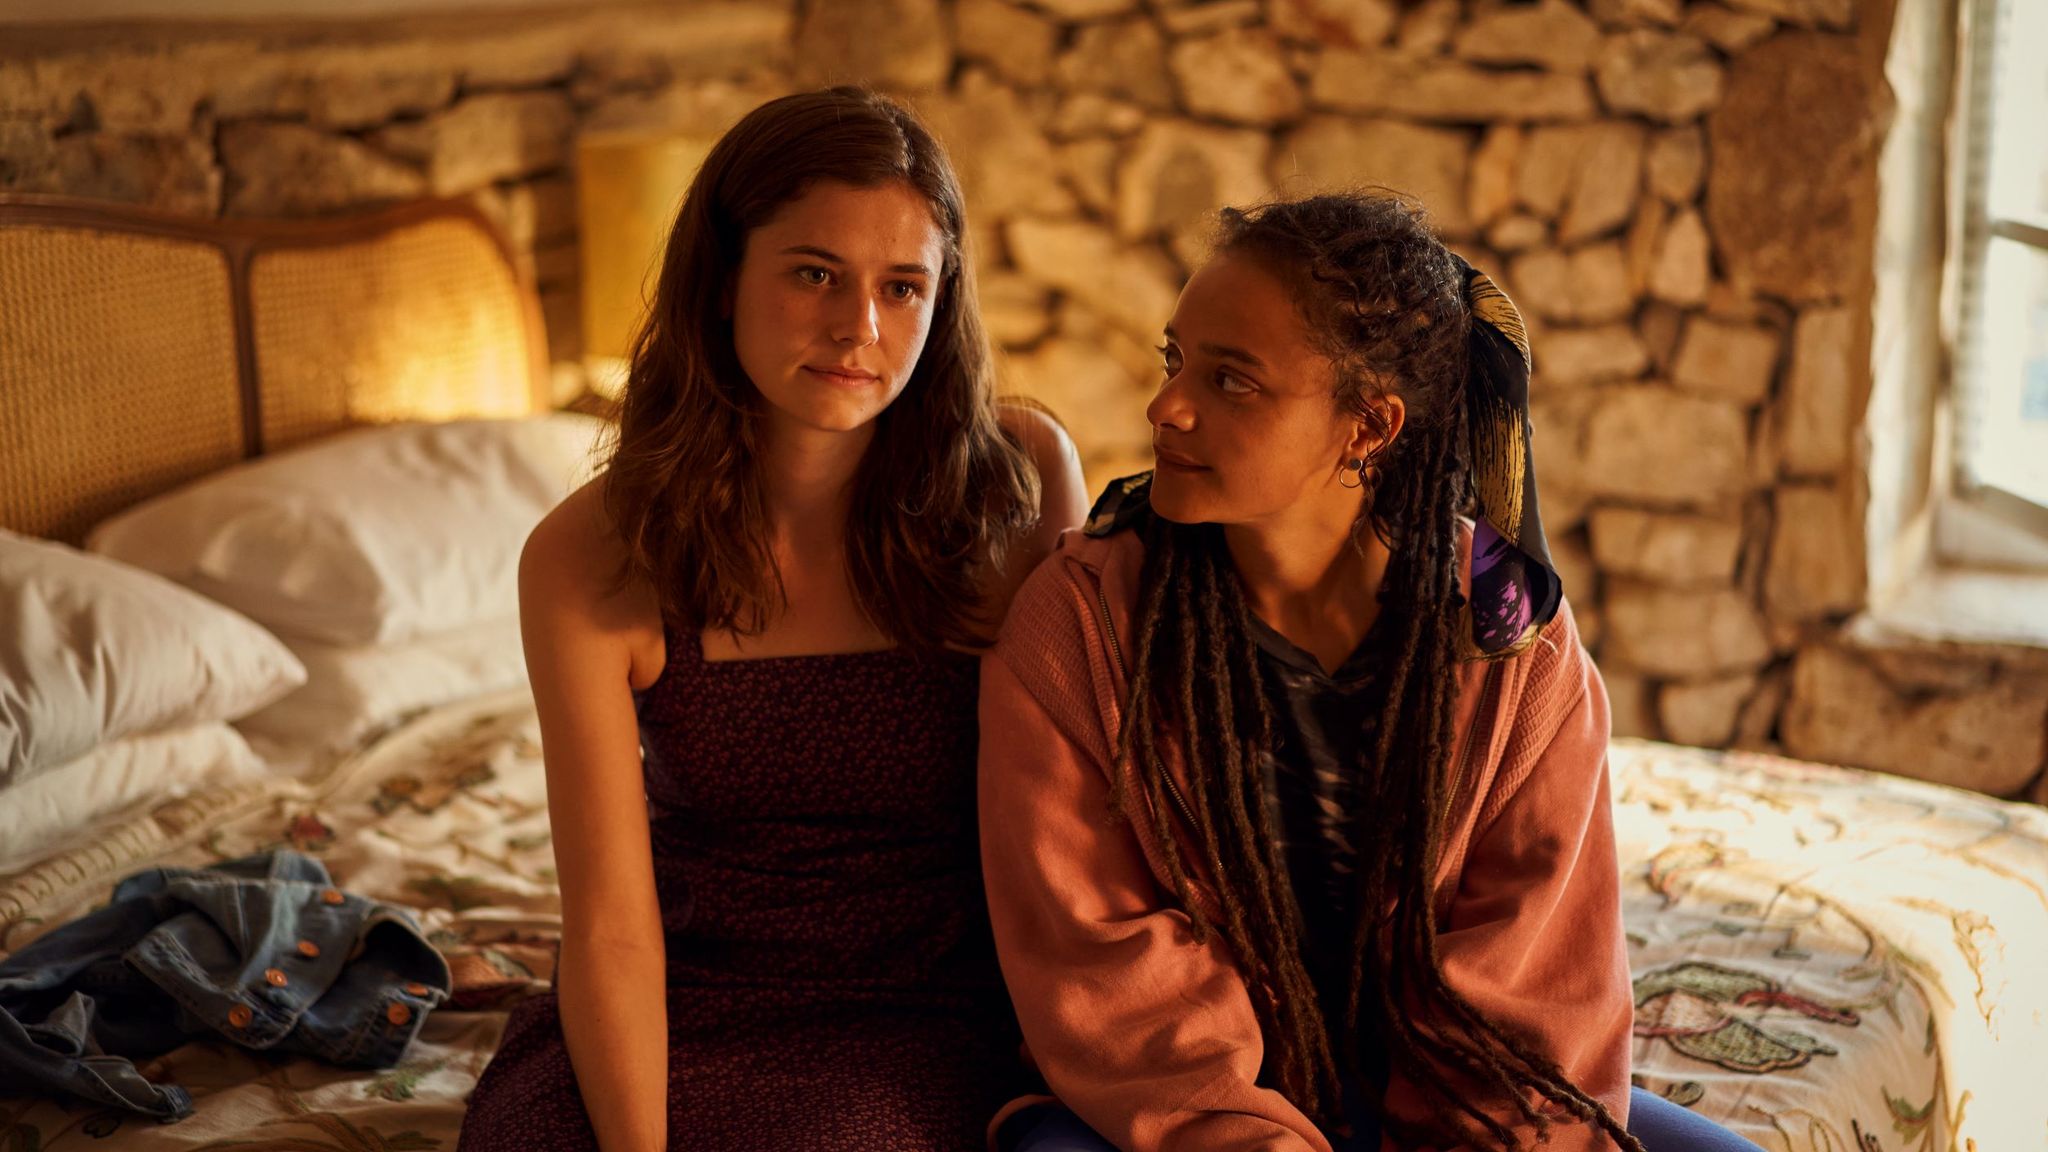 Alison Oliver and Sasha Lane in Conversations With Friends. Pic: BBC/ Element Pictures/ Enda Bowe